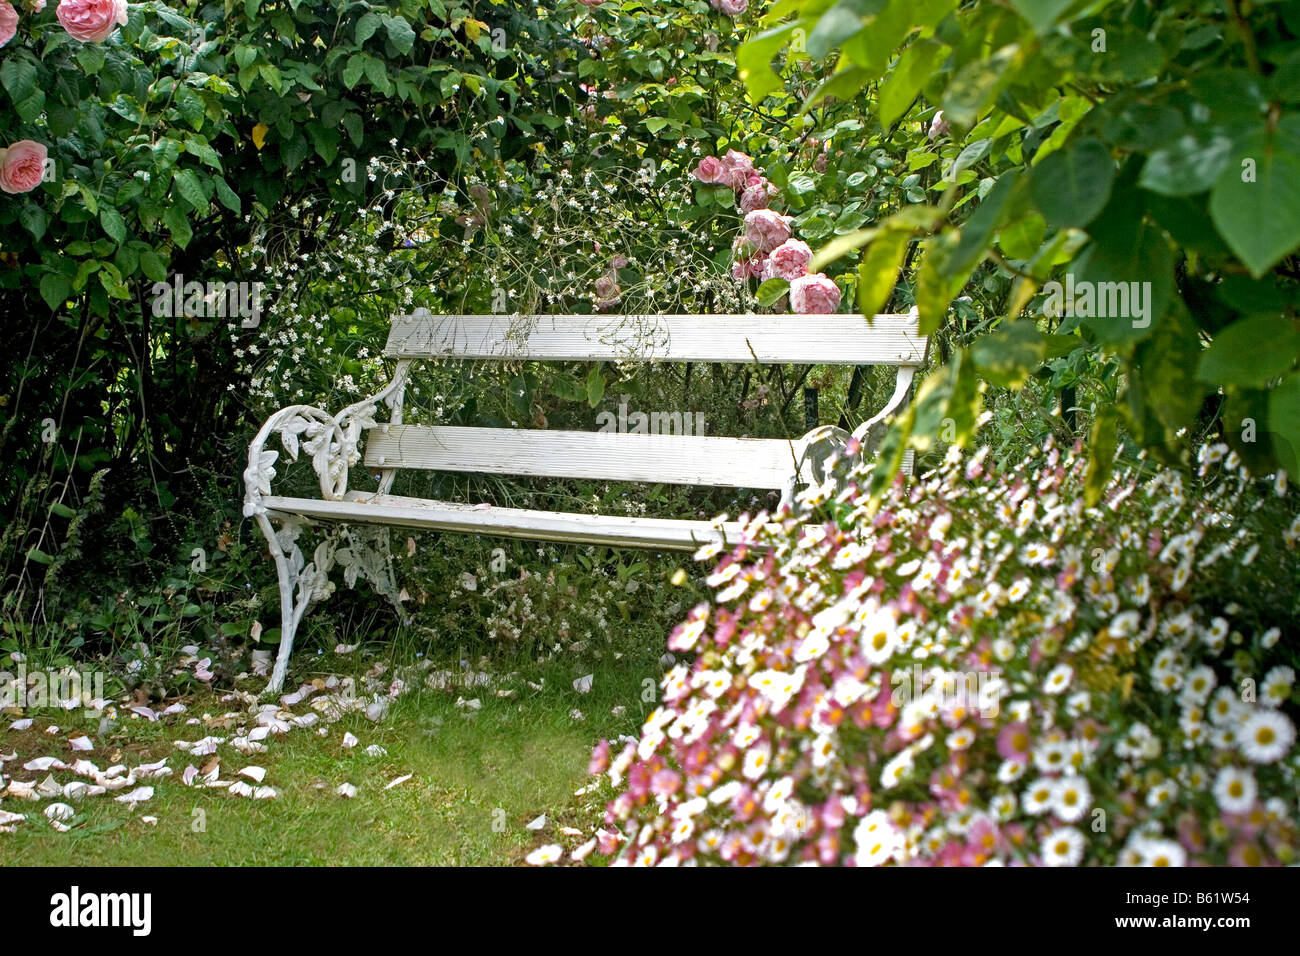 White bench in a beautiful garden, surrounded by blooming roses and daisies, with flower petals scattered on the grass. Stock Photo